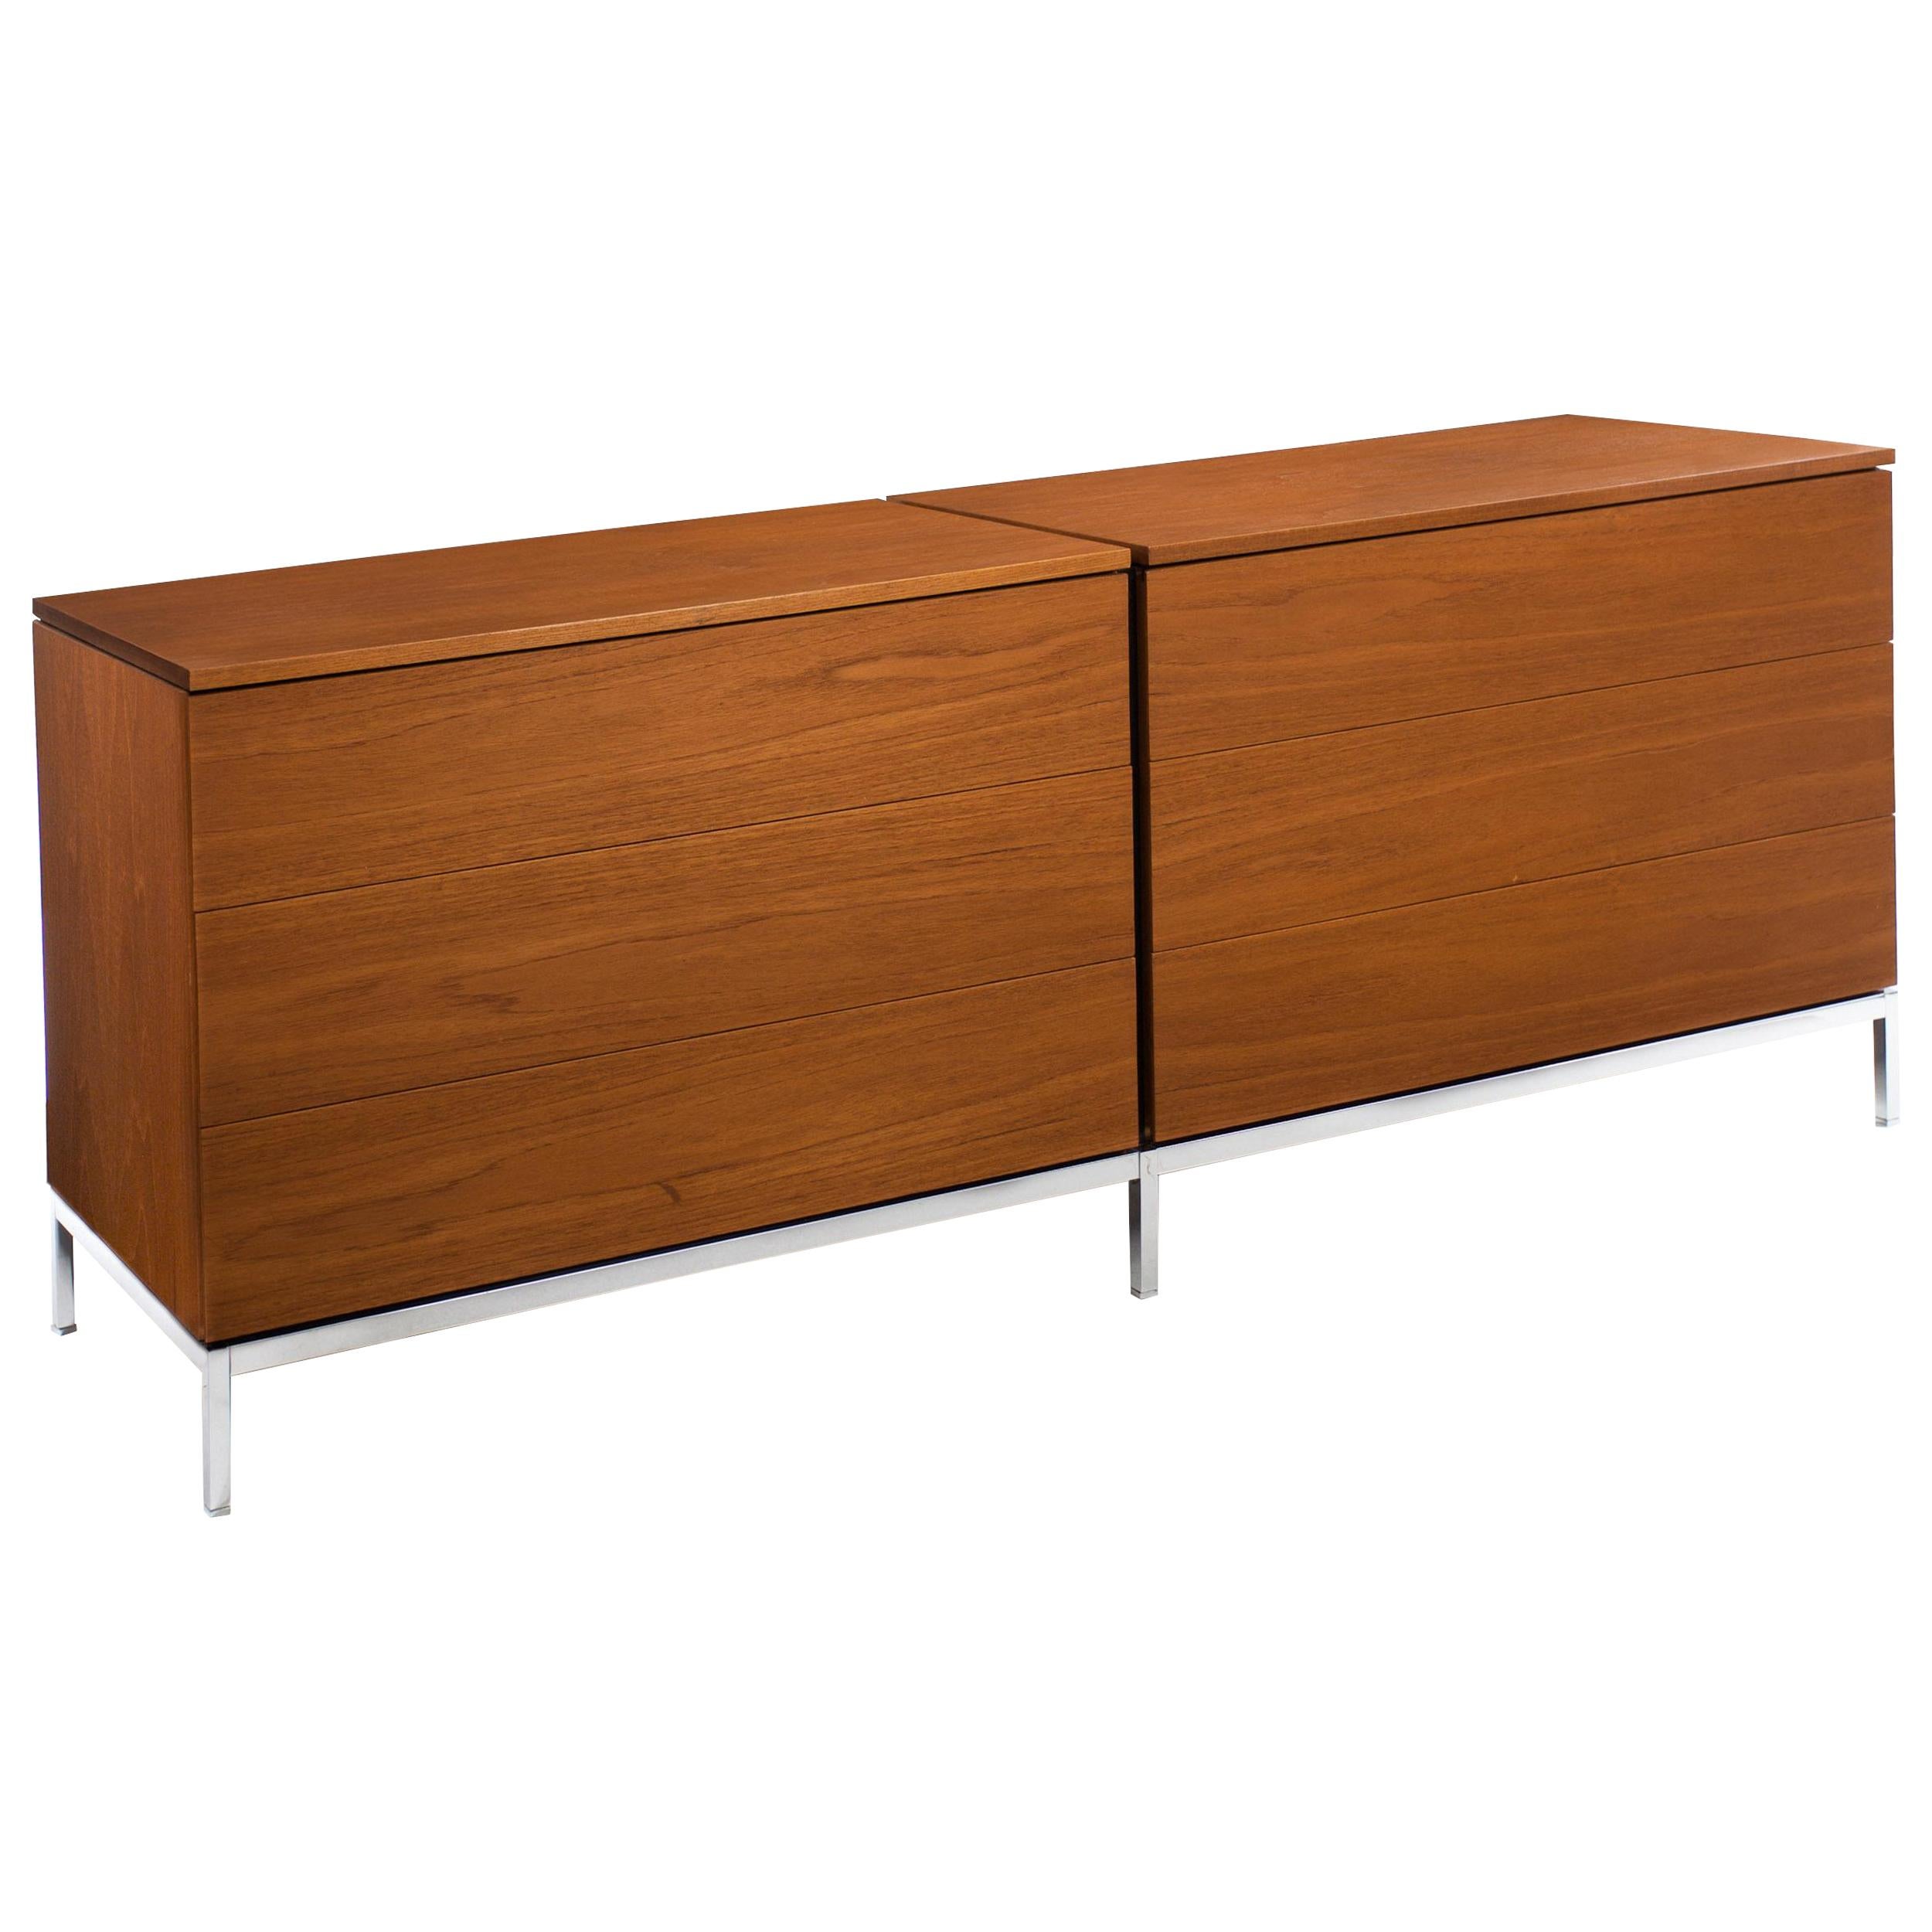 Knoll Mid-Century Modern Teak and Chrome Double Chest Credenza, circa 1970 For Sale